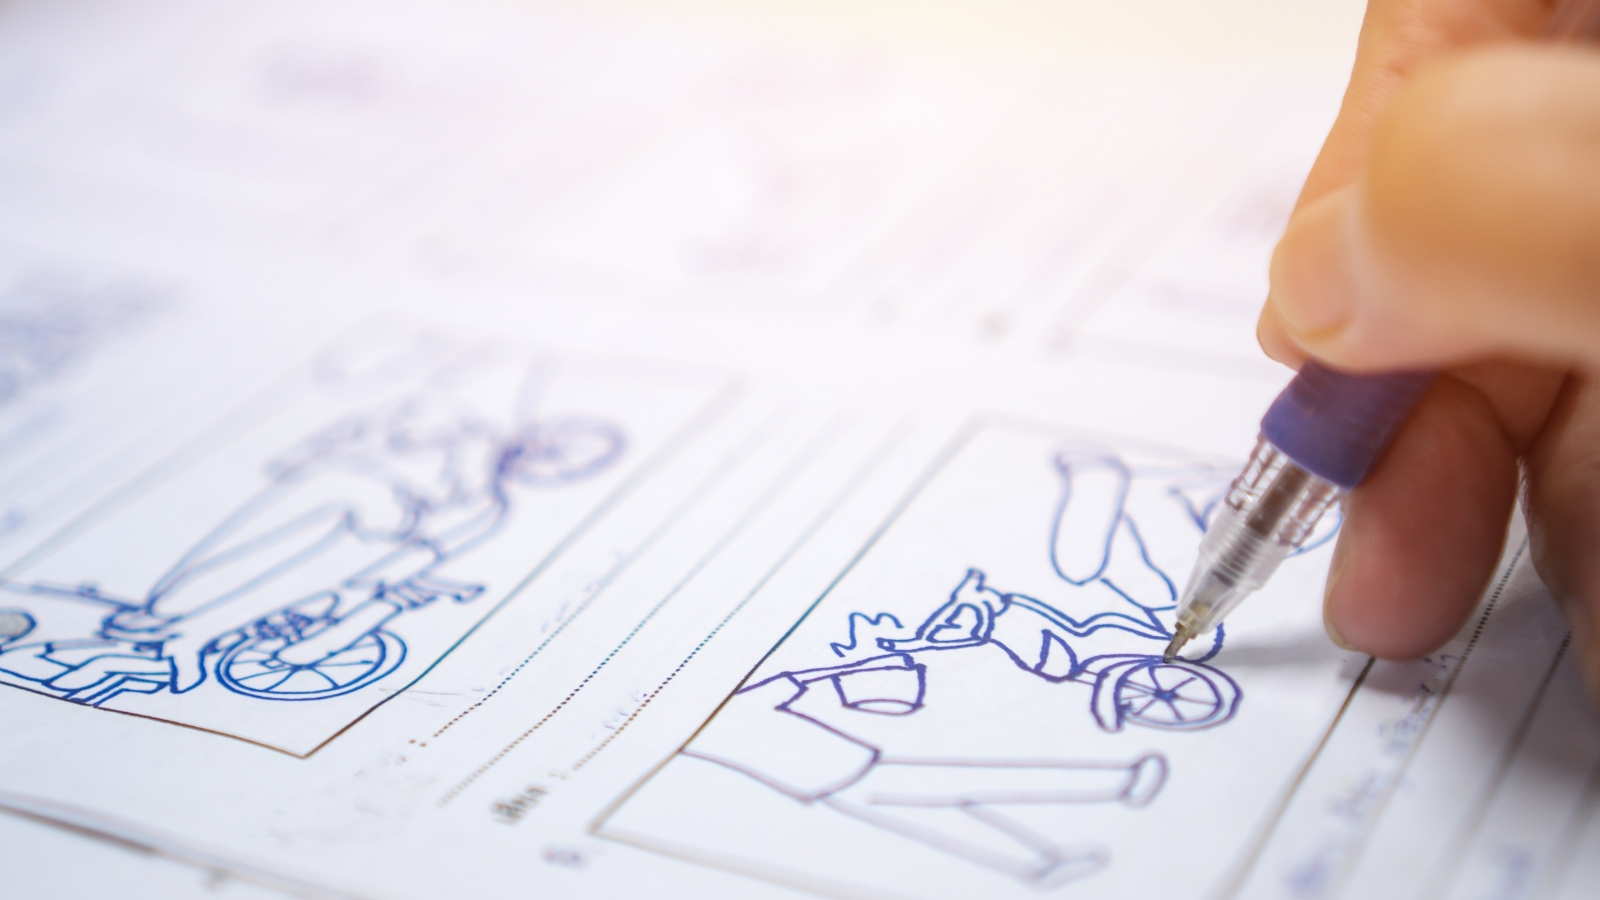 A person's hand draws a cartoon for an animation on a storyboarding sheet